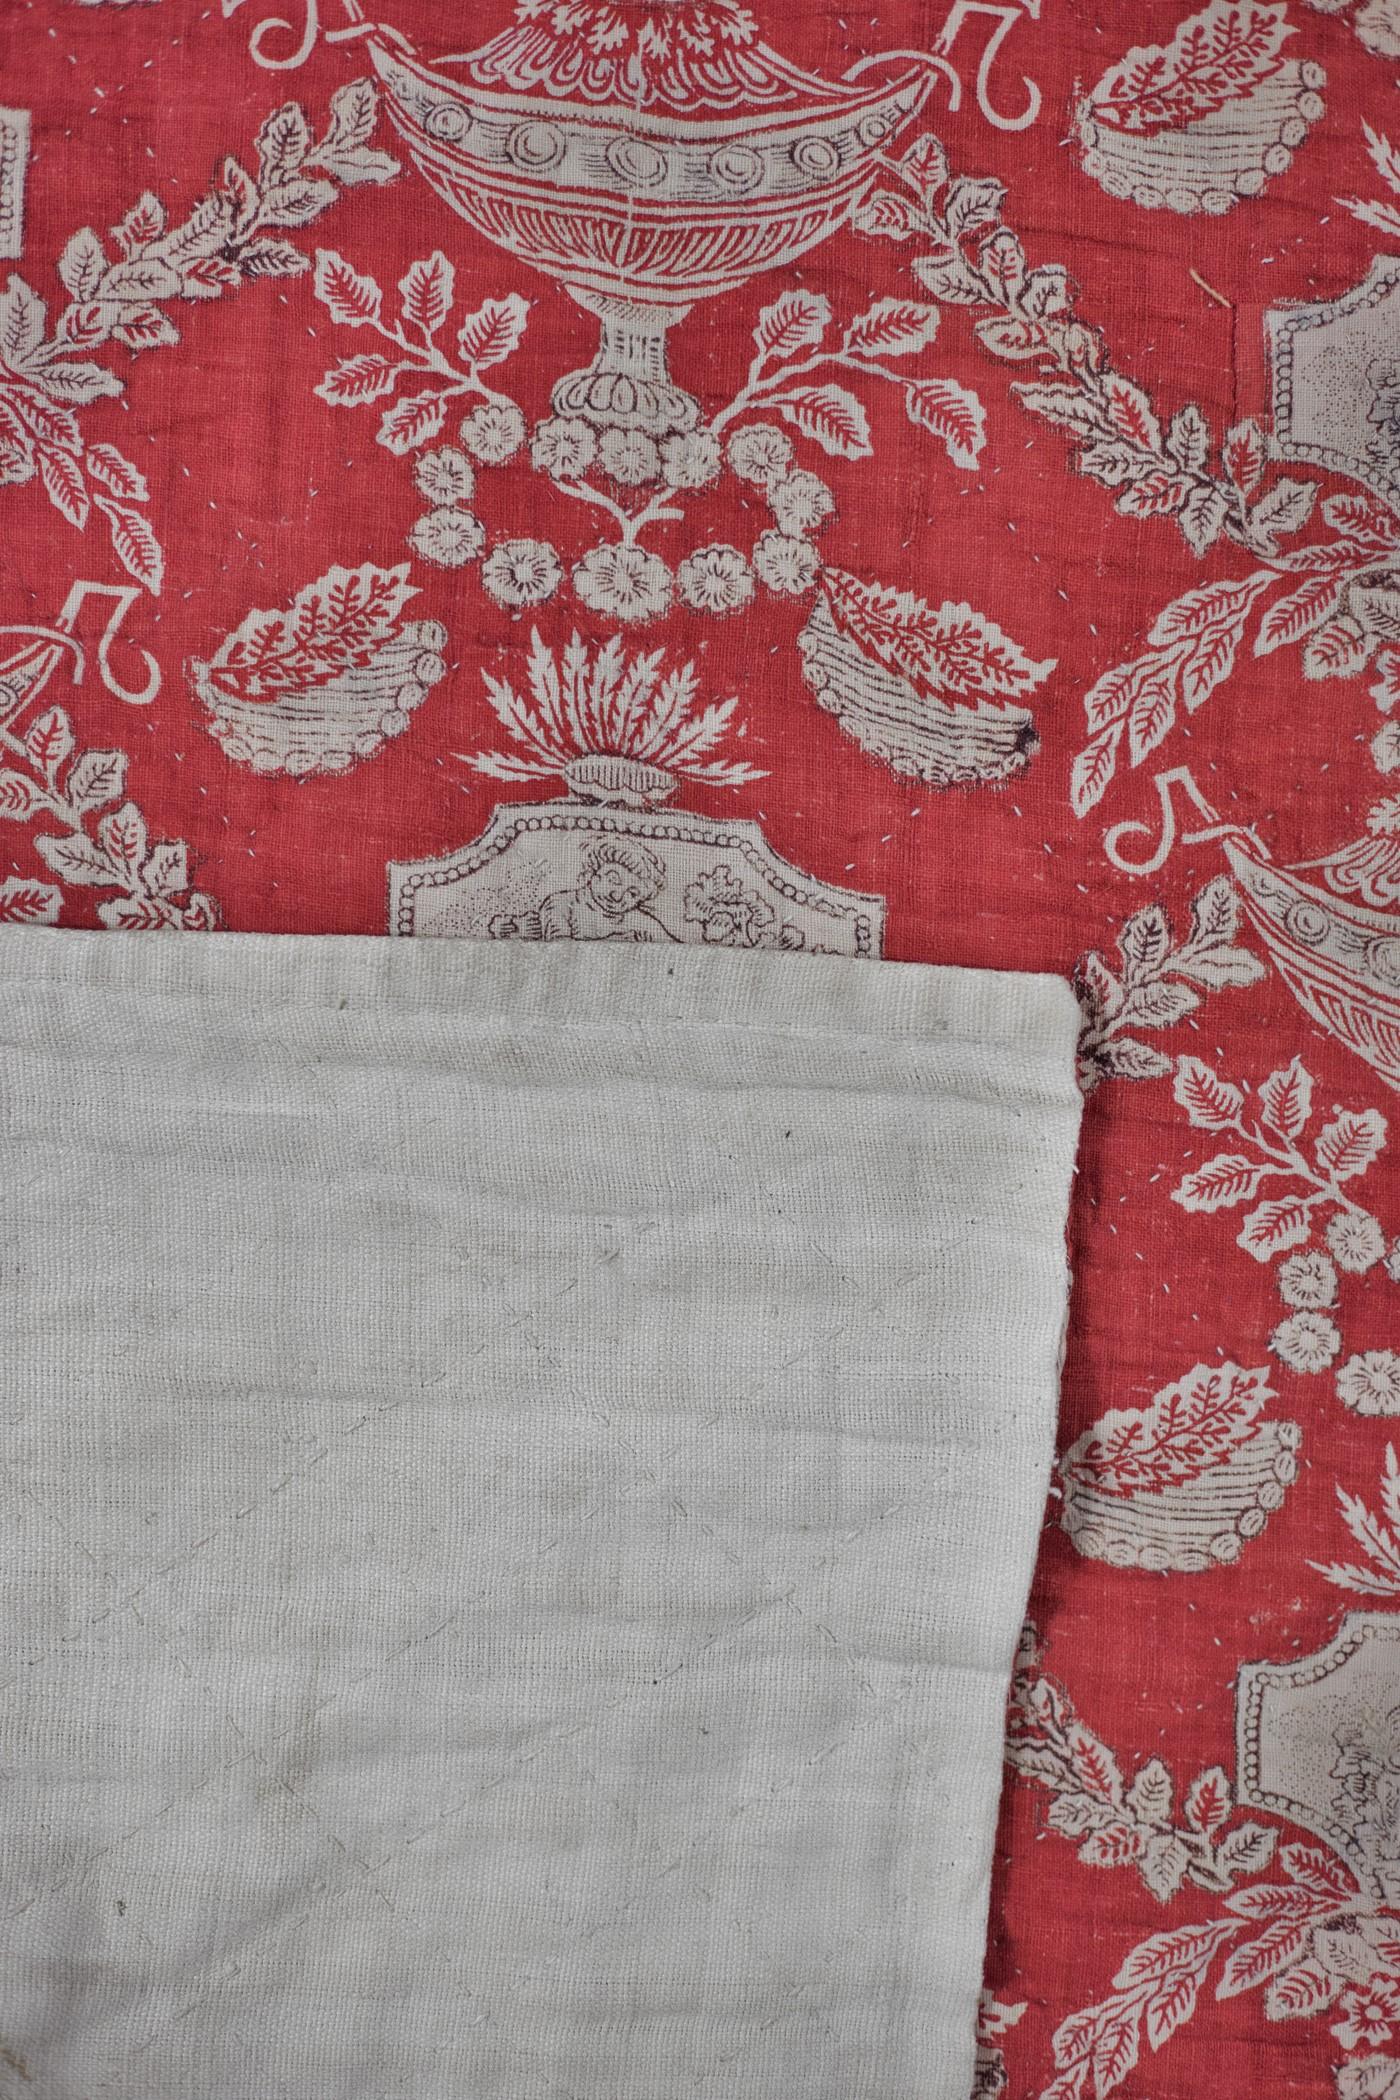 A French Madder Printed Cotton quilt with Neoclassical decor - Circa 1785/1800 6